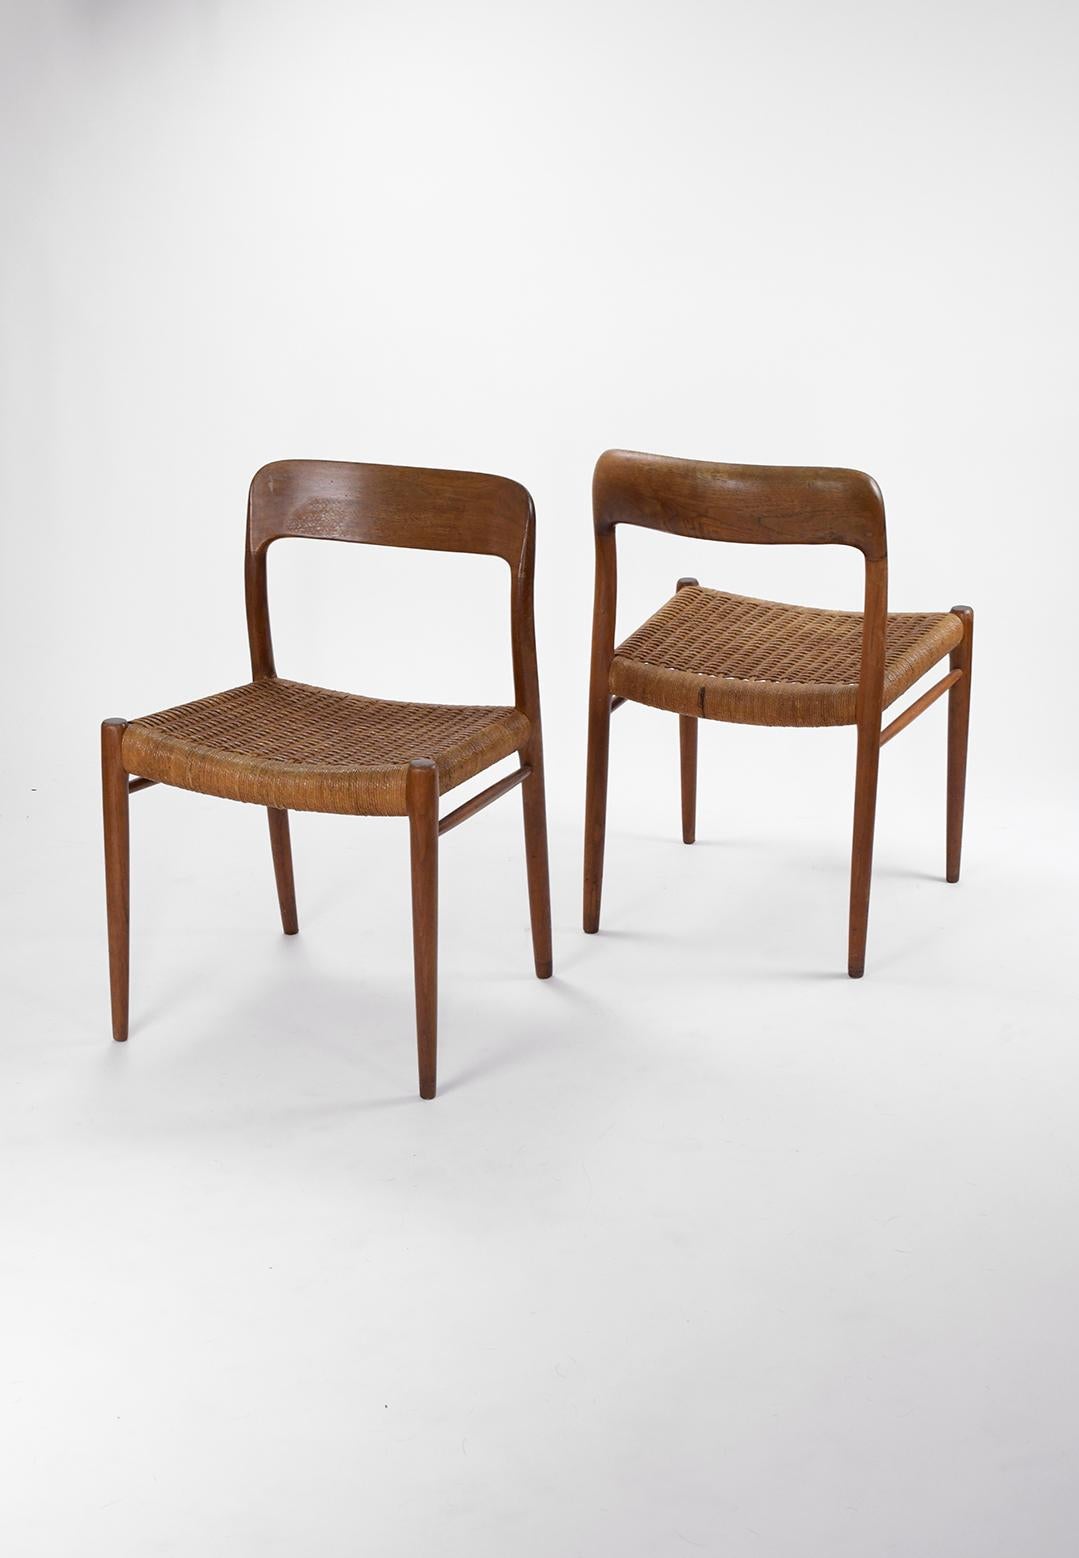 This iconic pair of Model 77 dining chairs designed by Neils Moller and produced by J.L. Møllers Møbelfabrik in the 1960´s. This model chair from Moller has been viewed as a showcase of his commitment to timeless design and craftsmanship. The chairs